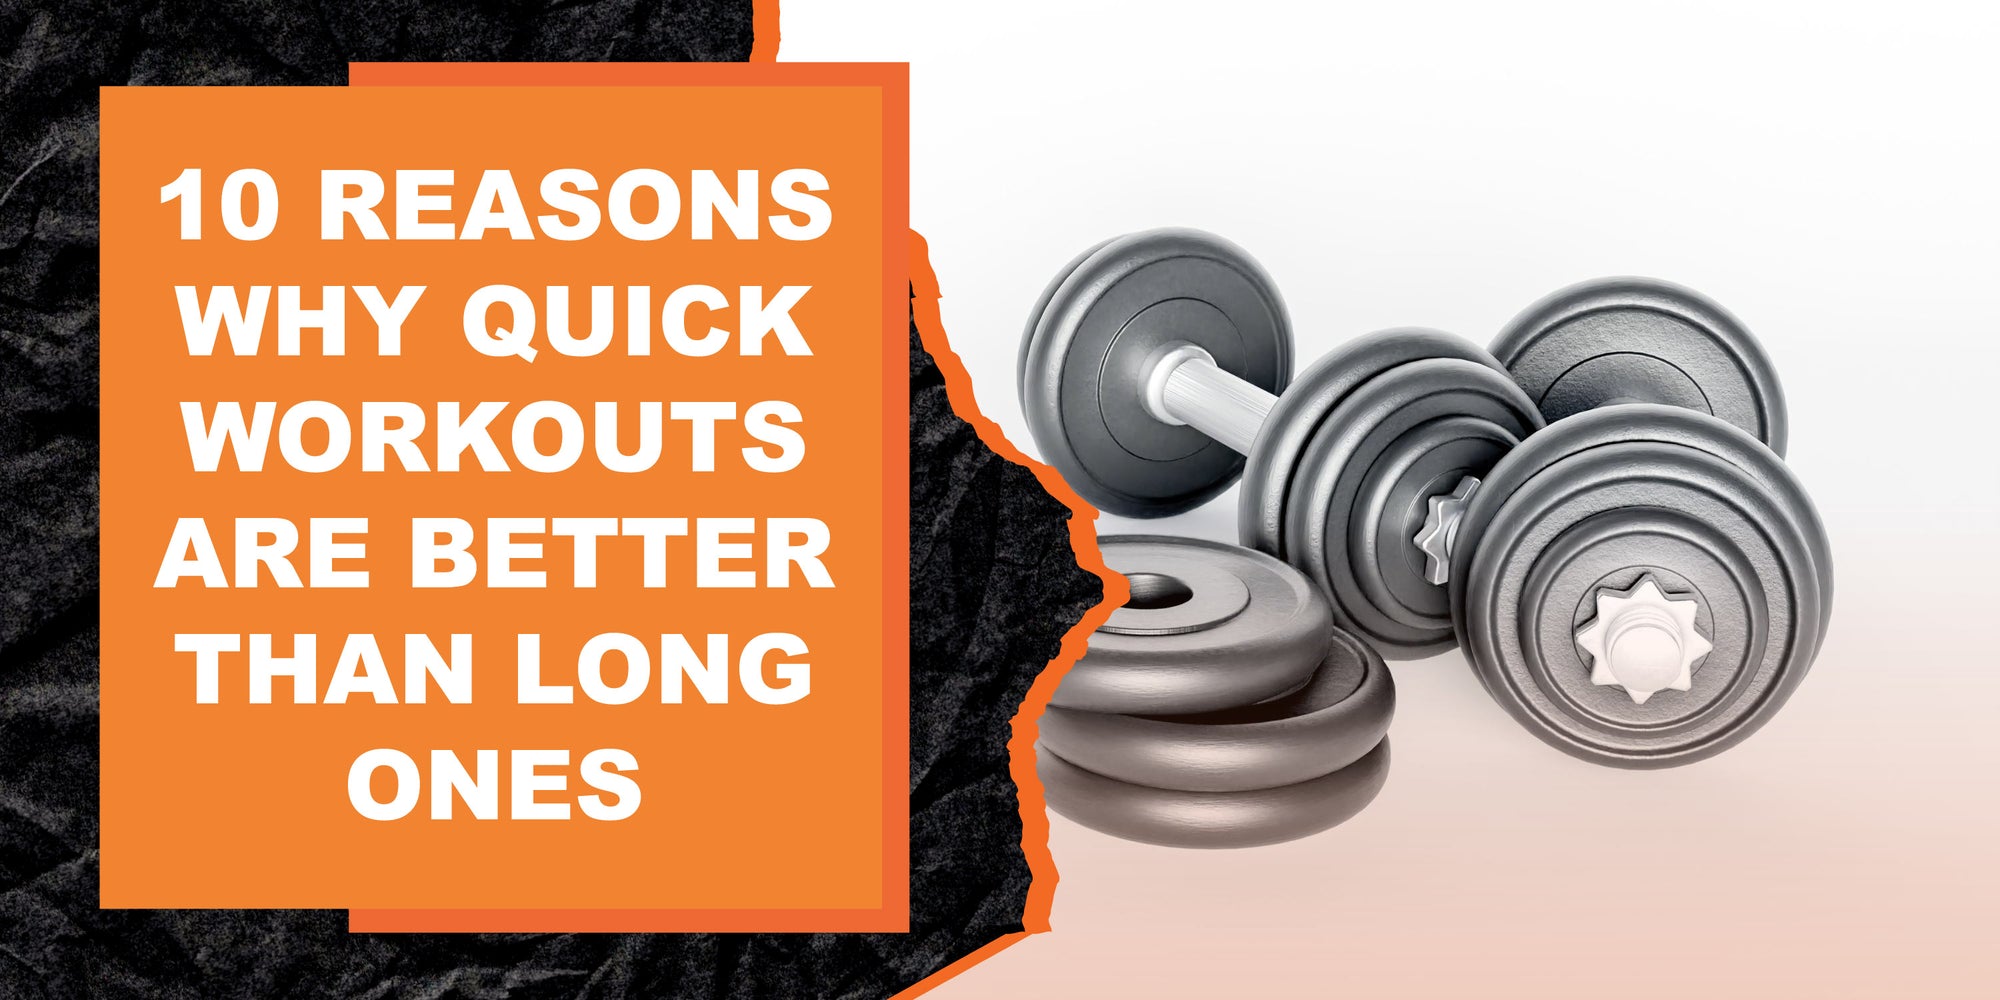 10 Reasons Why Quick Workouts Are Better Than Long Ones